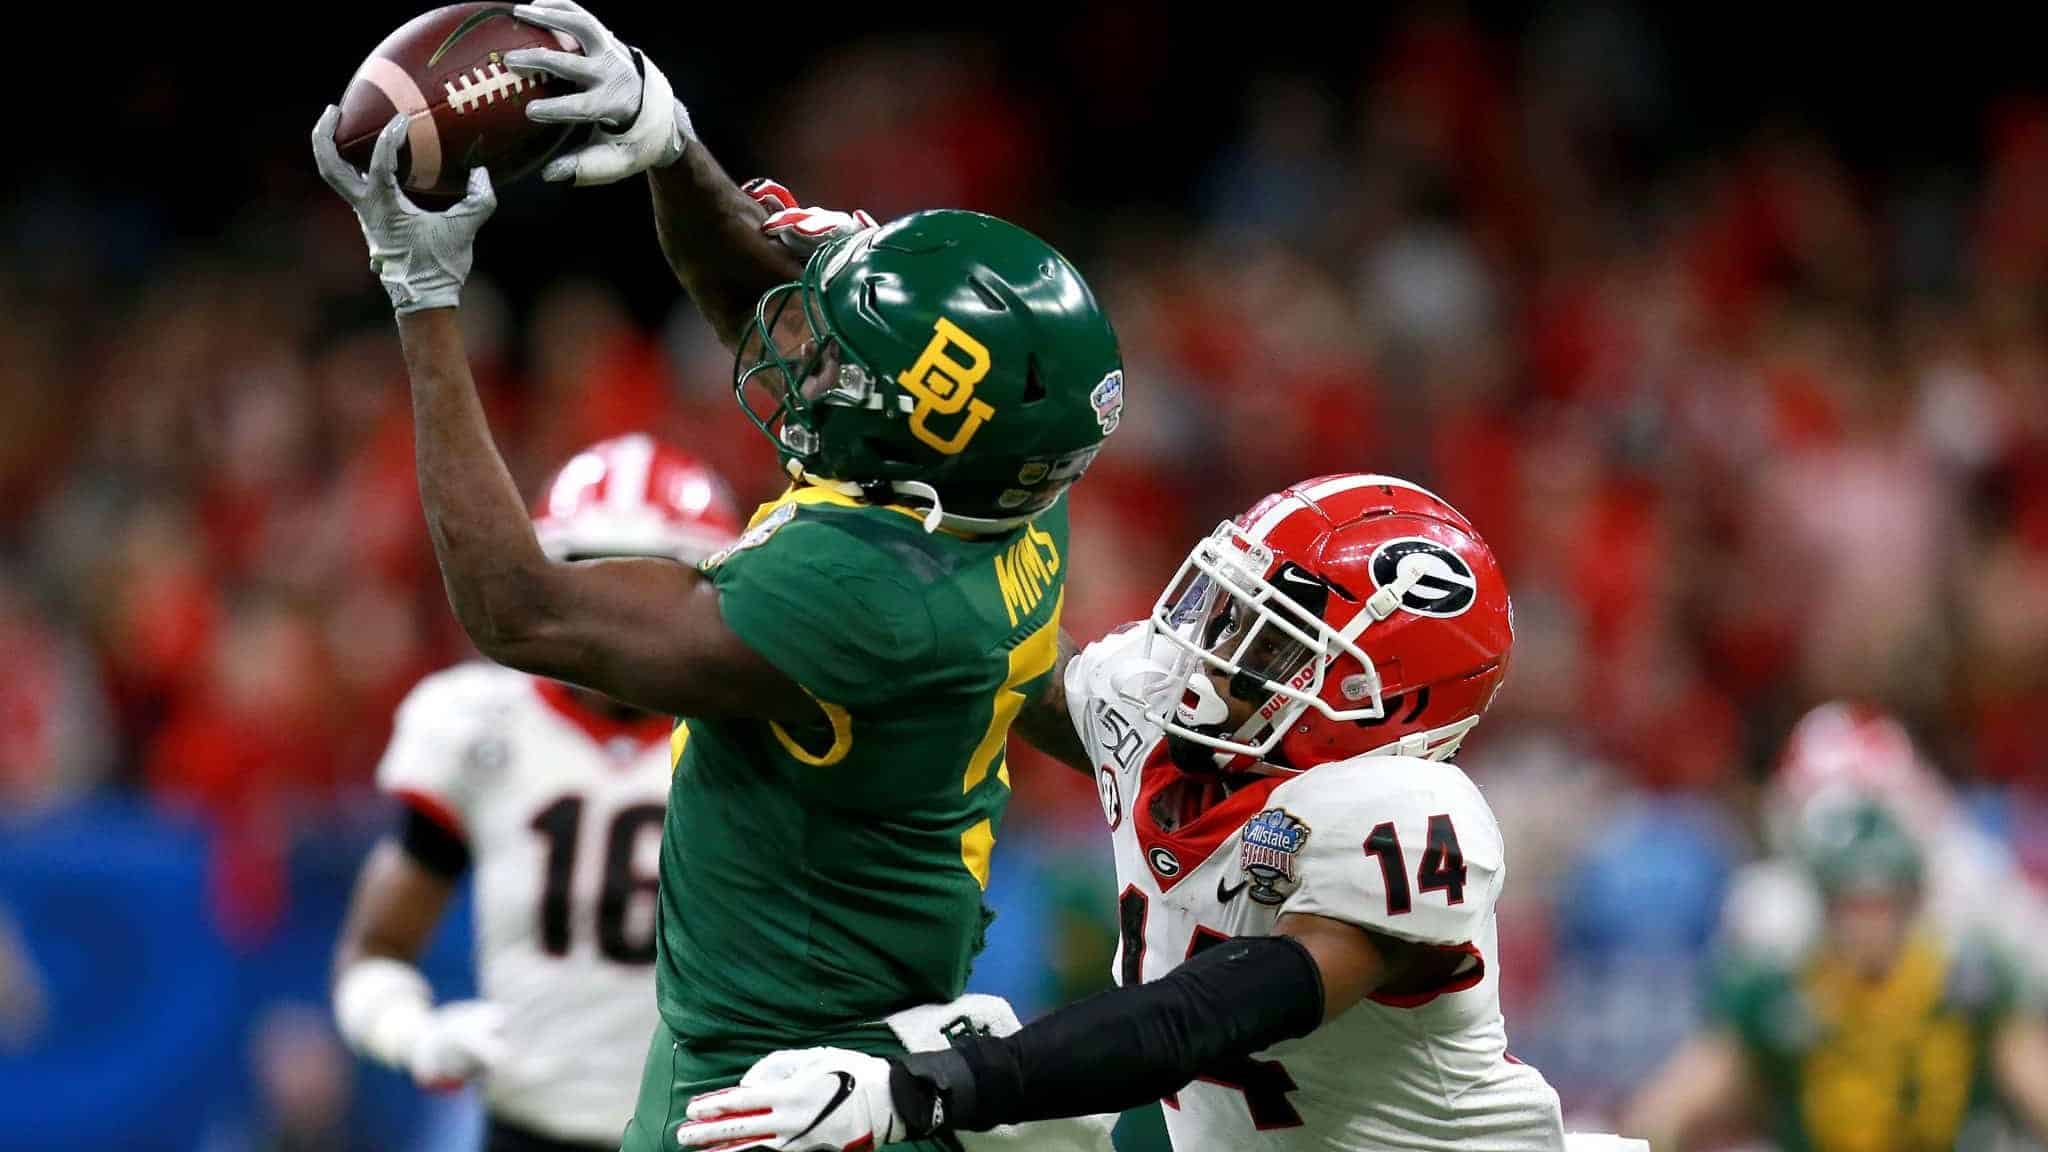 NEW ORLEANS, LOUISIANA - JANUARY 01: Denzel Mims #5 of the Baylor Bears catches a pass over DJ Daniel #14 of the Georgia Bulldogs during the Allstate Sugar Bowl at Mercedes Benz Superdome on January 01, 2020 in New Orleans, Louisiana.